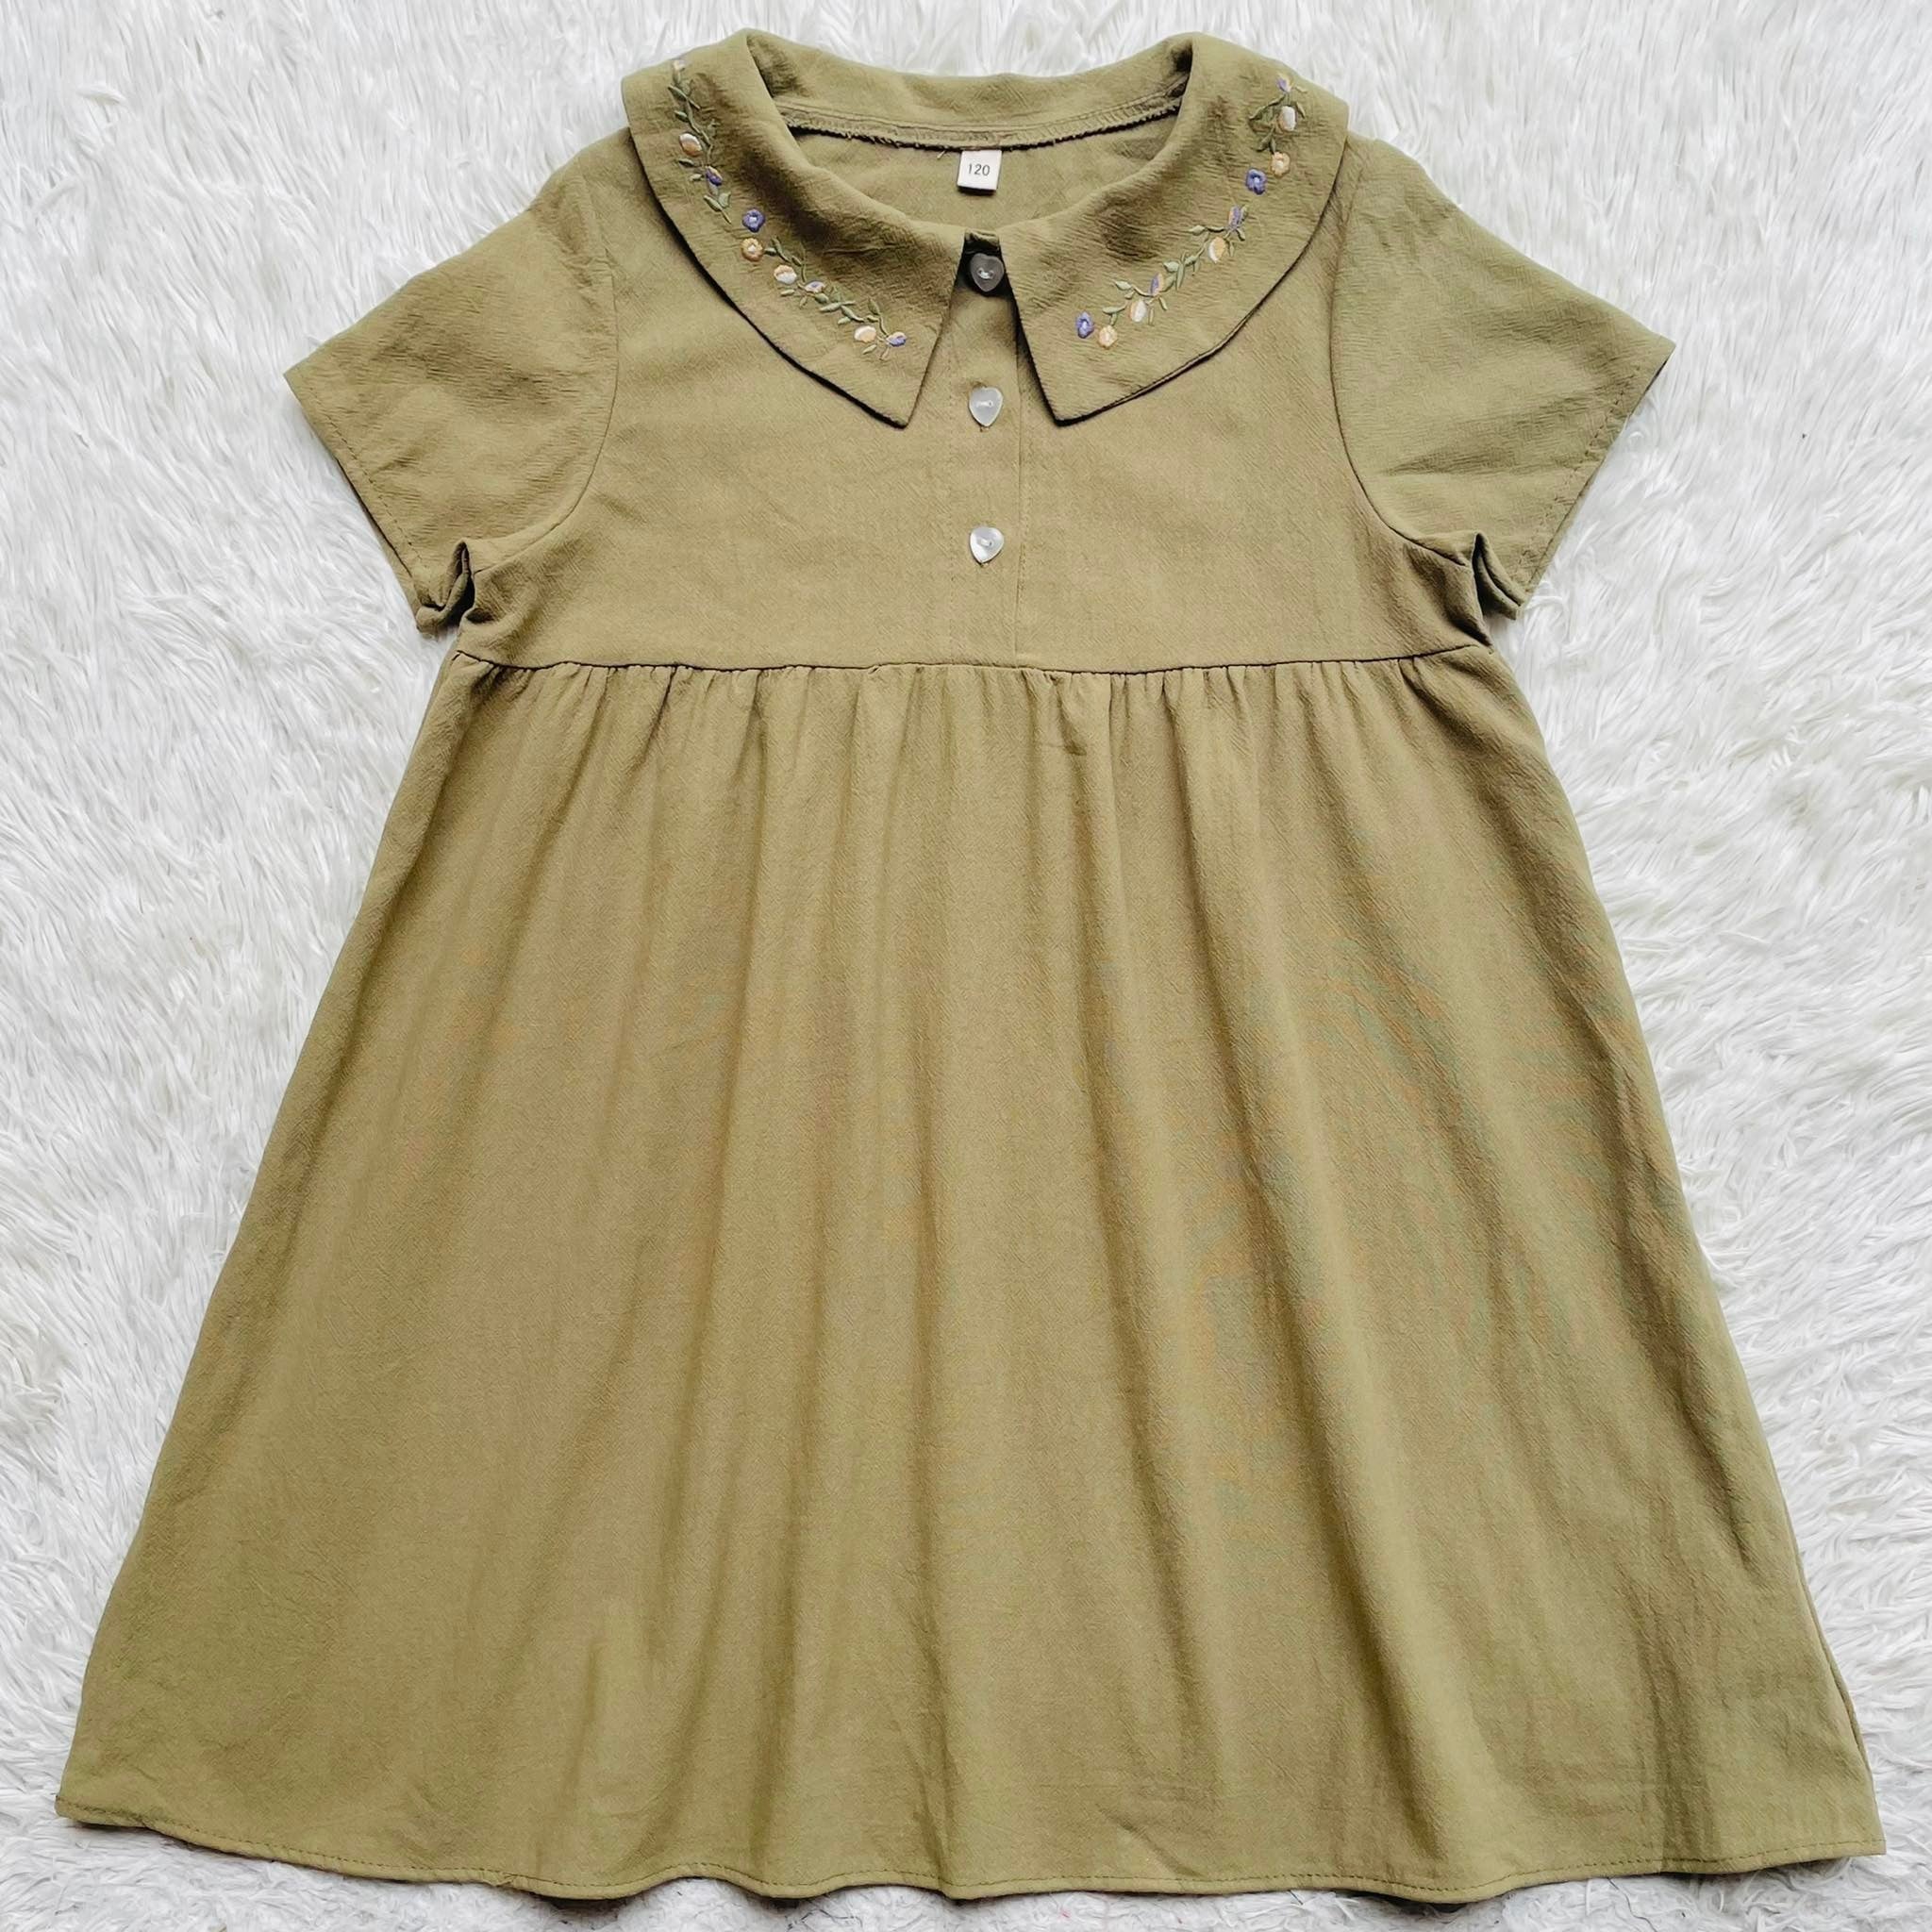 Export 129023 (Army Green)